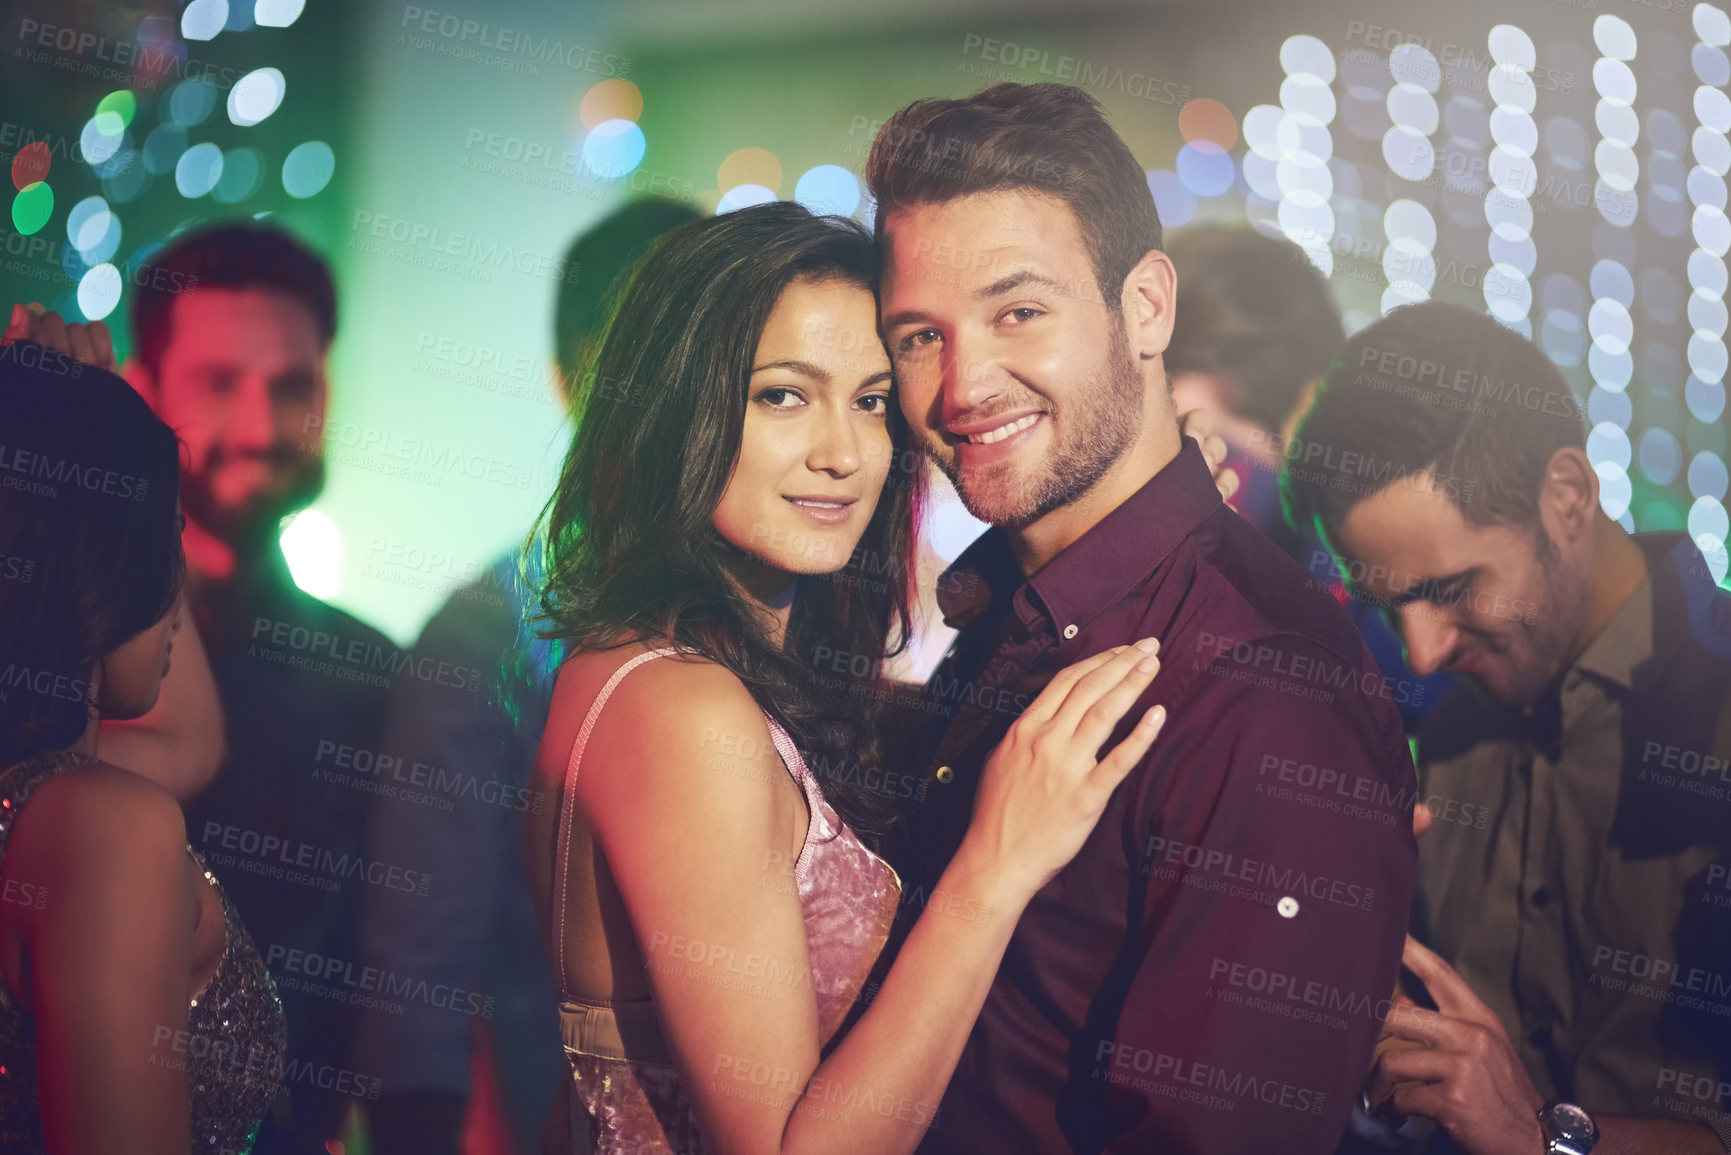 Buy stock photo Shot of an affectionate young couple dancing on a crowded dance floor in a nightclub